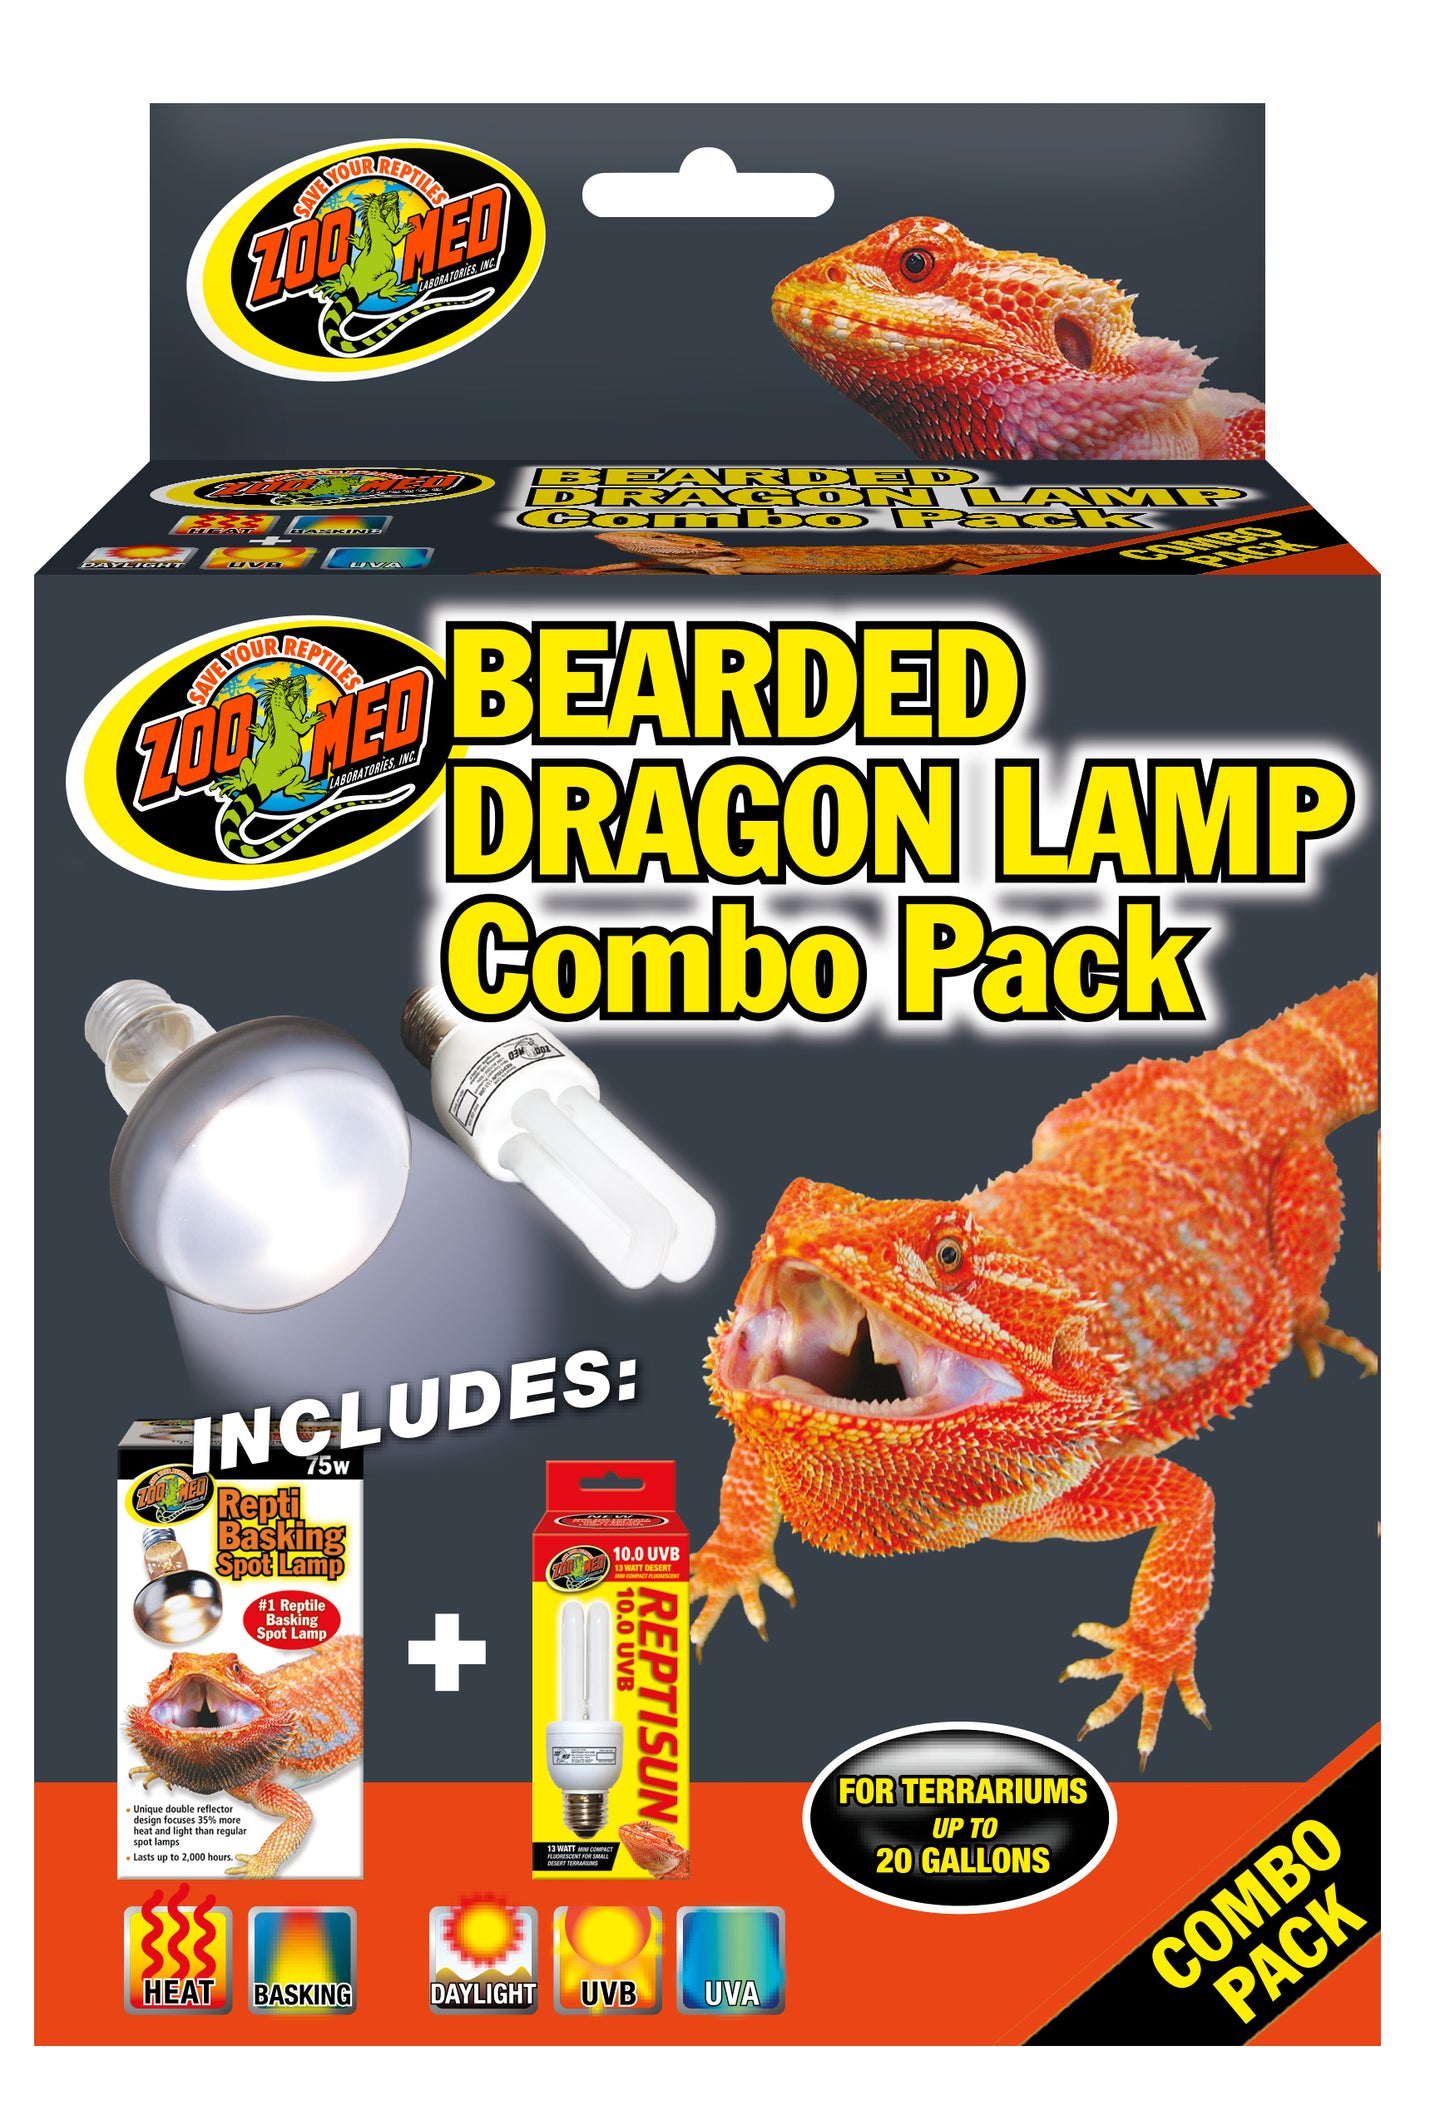 Zoo Med Bearded Dragon Lamp Combo Pack. Heat, UVB, Basking. Includes Repti Basking Spot Lamp and ReptiSun 10.0 UVB. For Terrariums up tp 20 gallons.Combo Pack